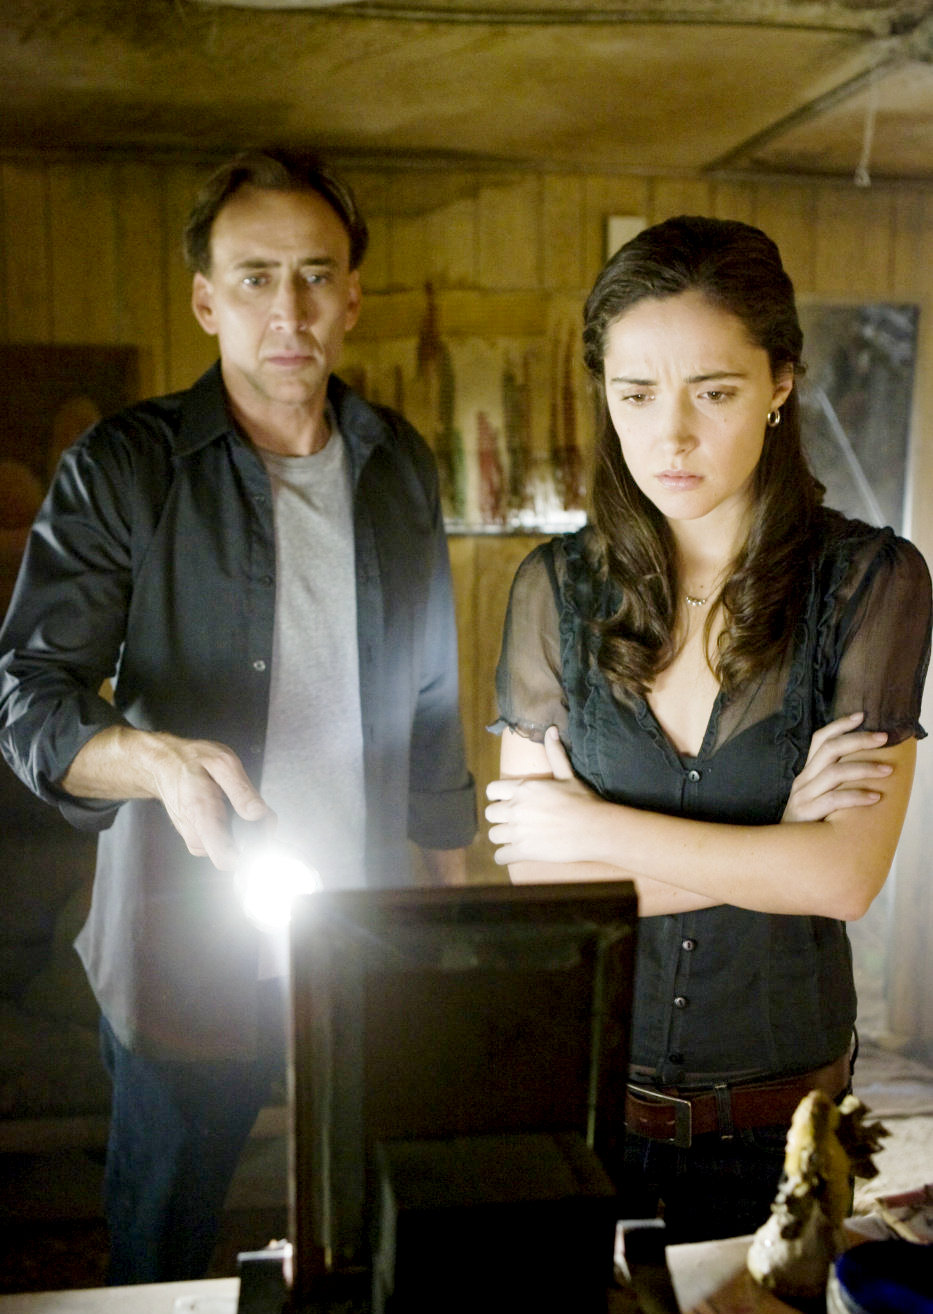 Nicolas Cage stars as Ted Myles and Rose Byrne stars as Diana Whelan in Summit Entertainment's Knowing (2009). Photo credit by Vince Valitutti.